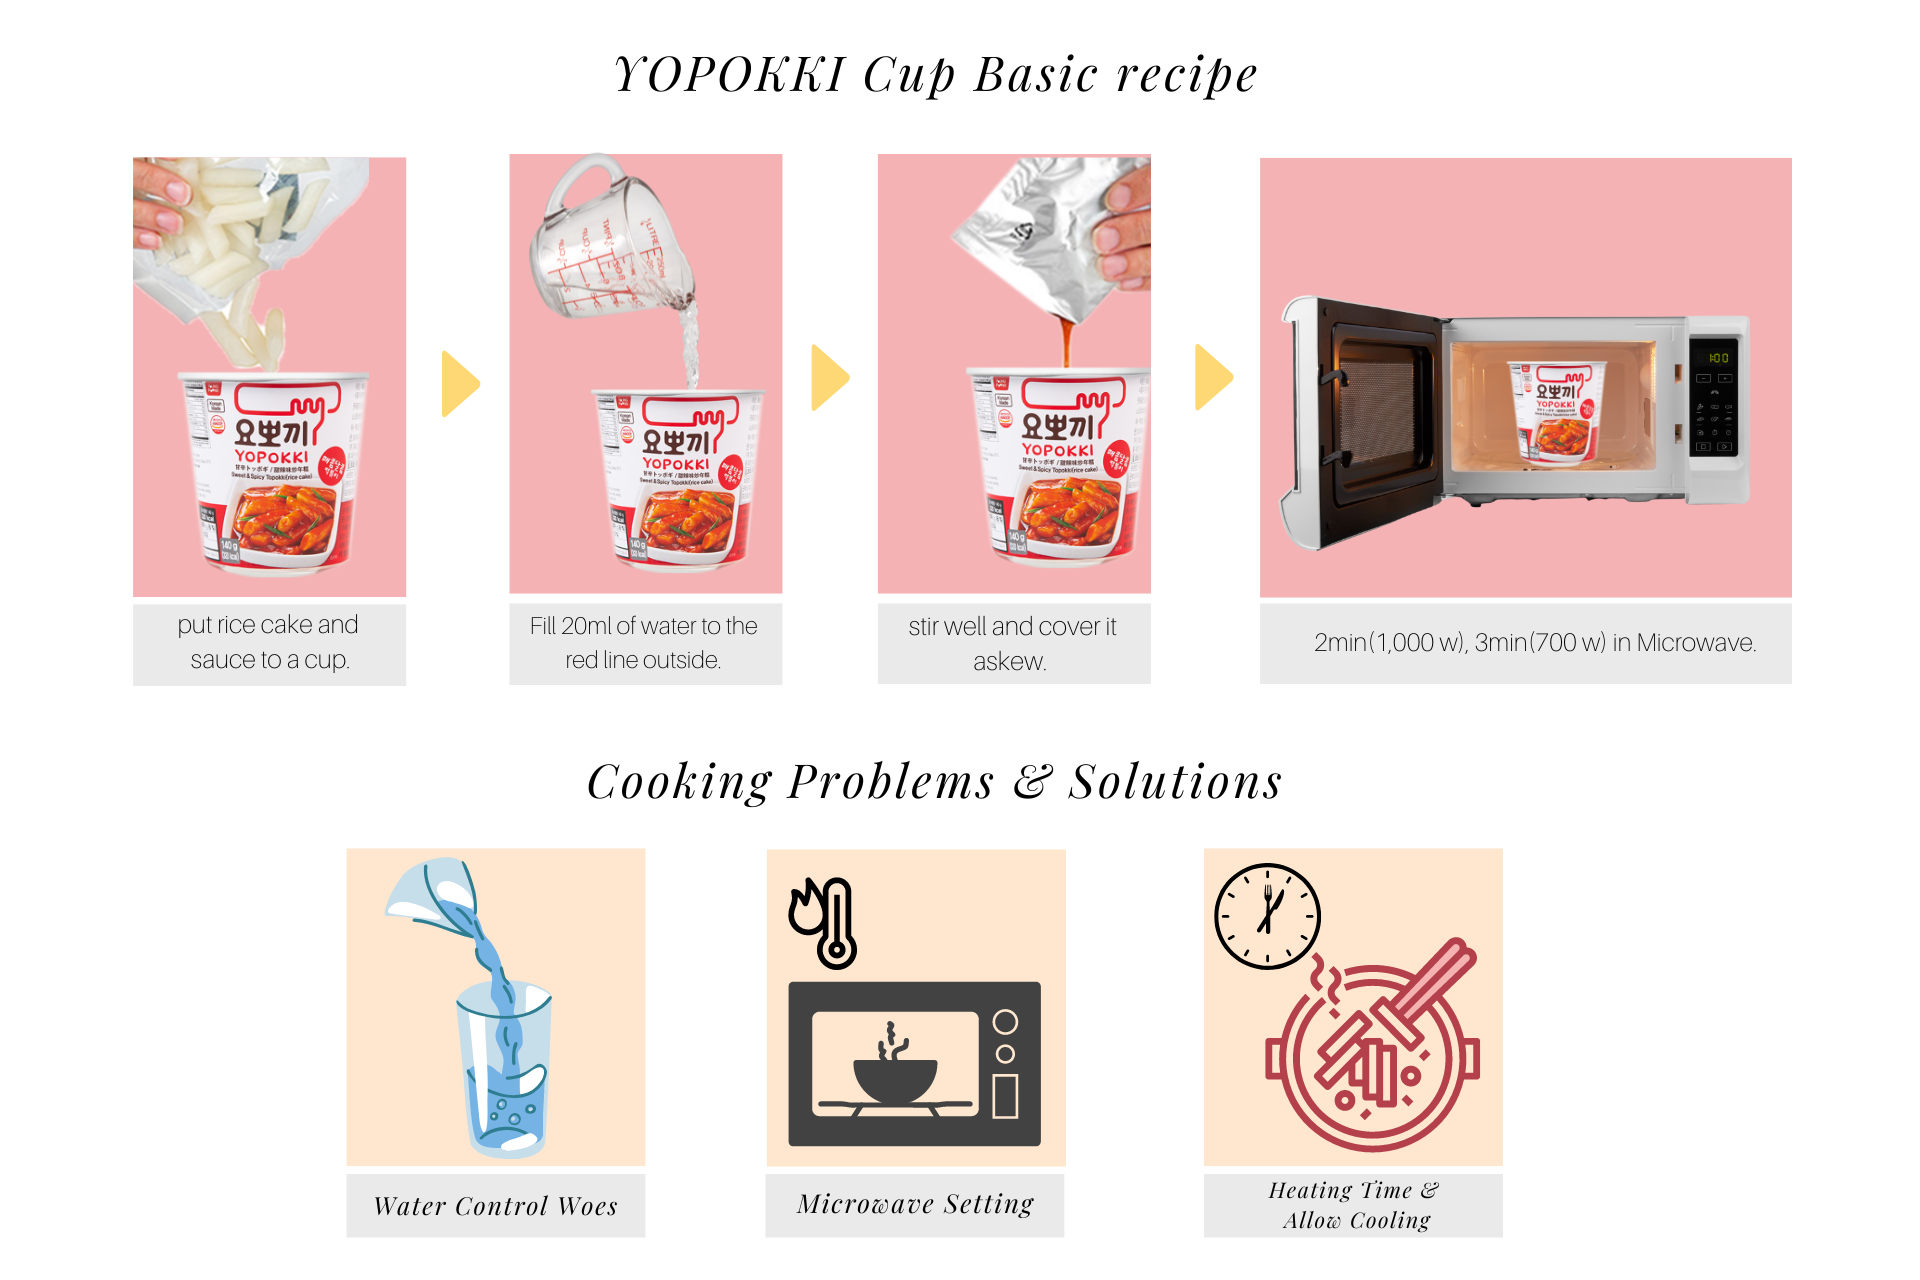 YOPOKKI Cup Basic recipe Cooking Problems & Solutions